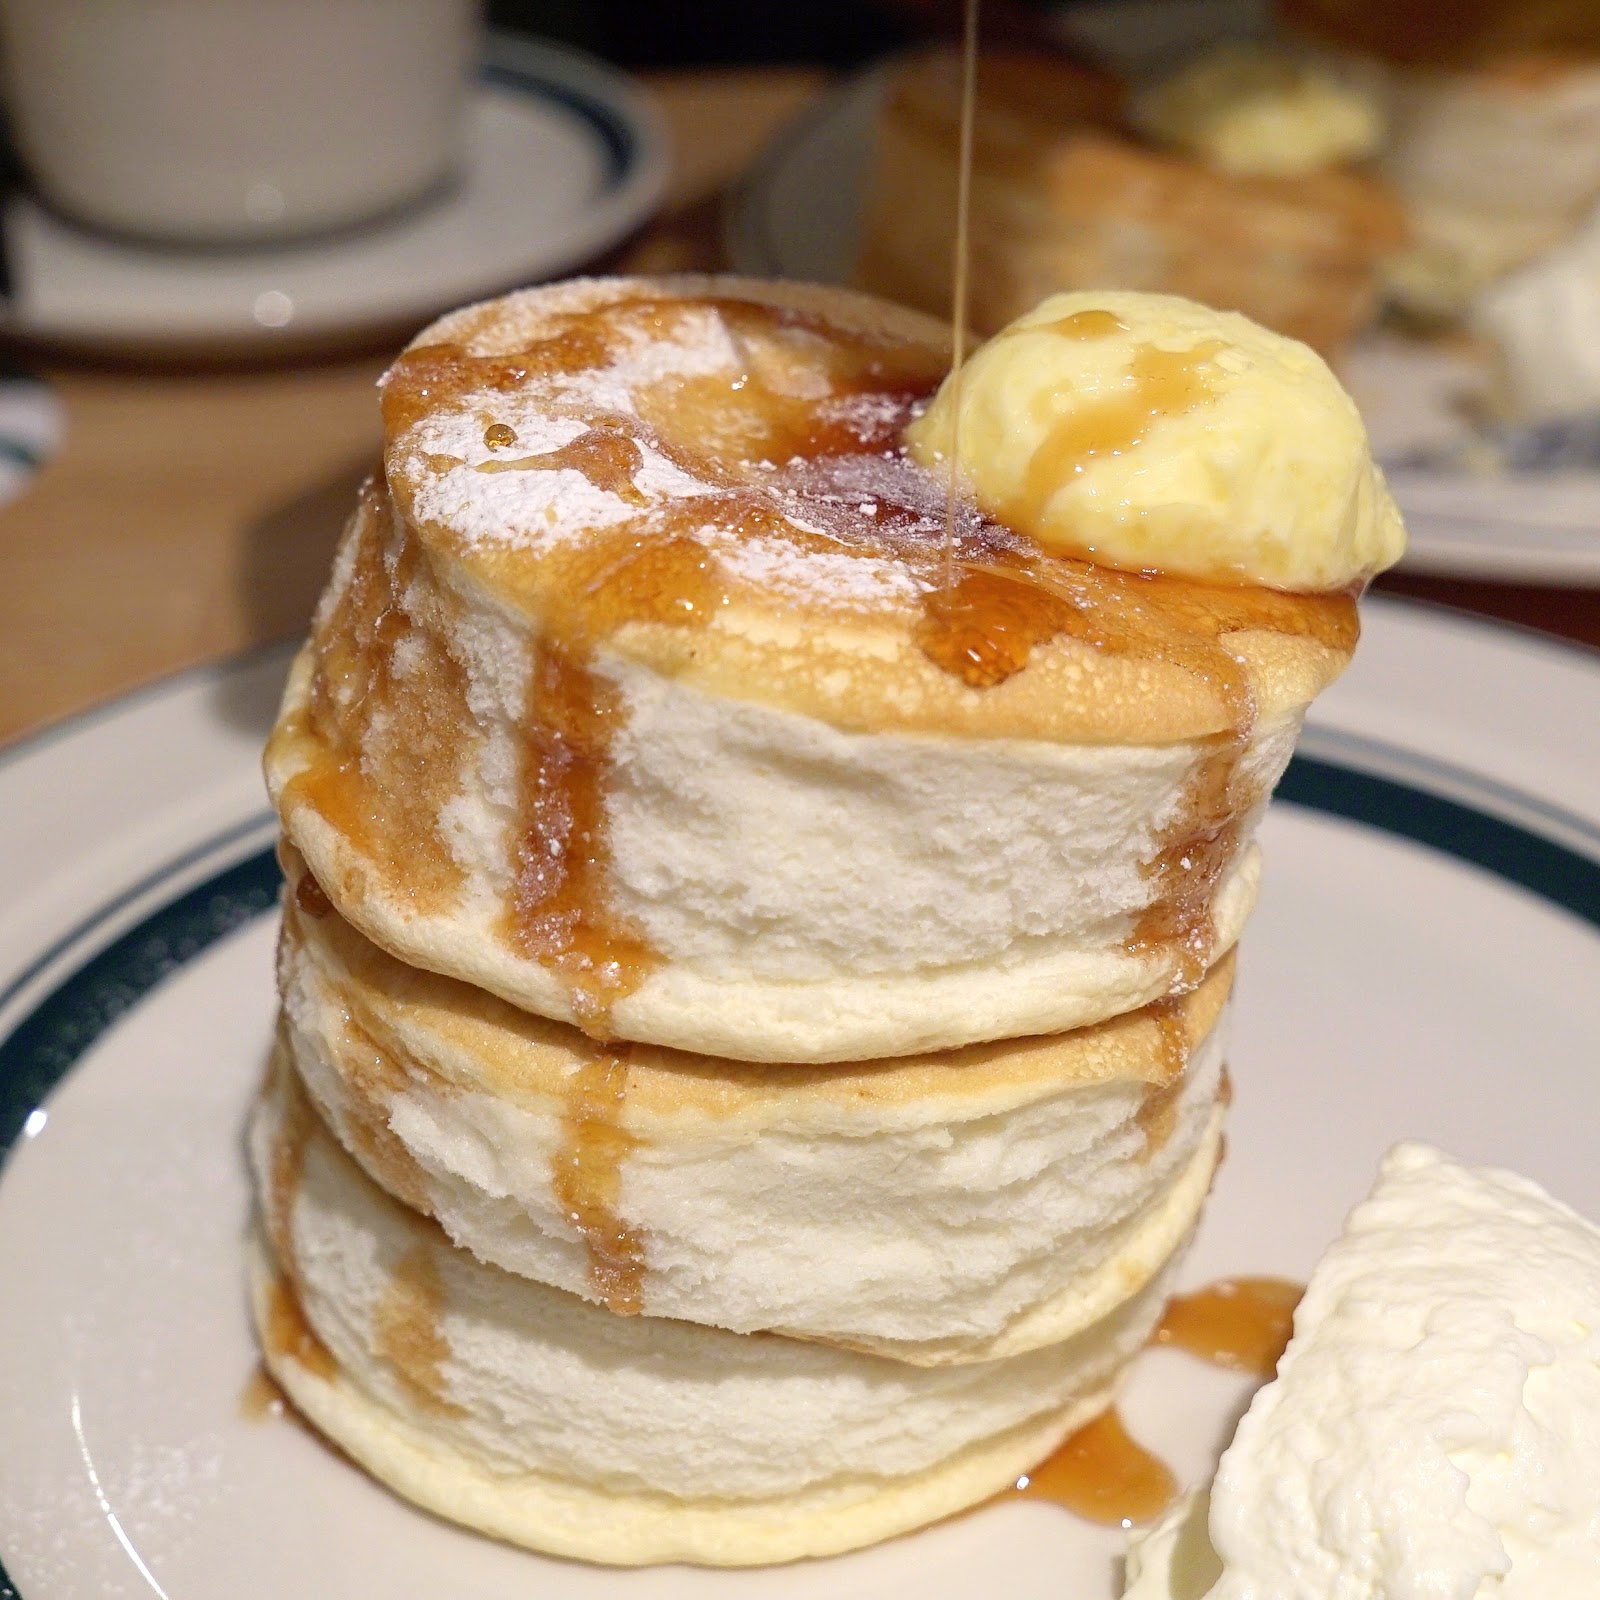 The Quest For The Fluffiest Japanese Pancakes